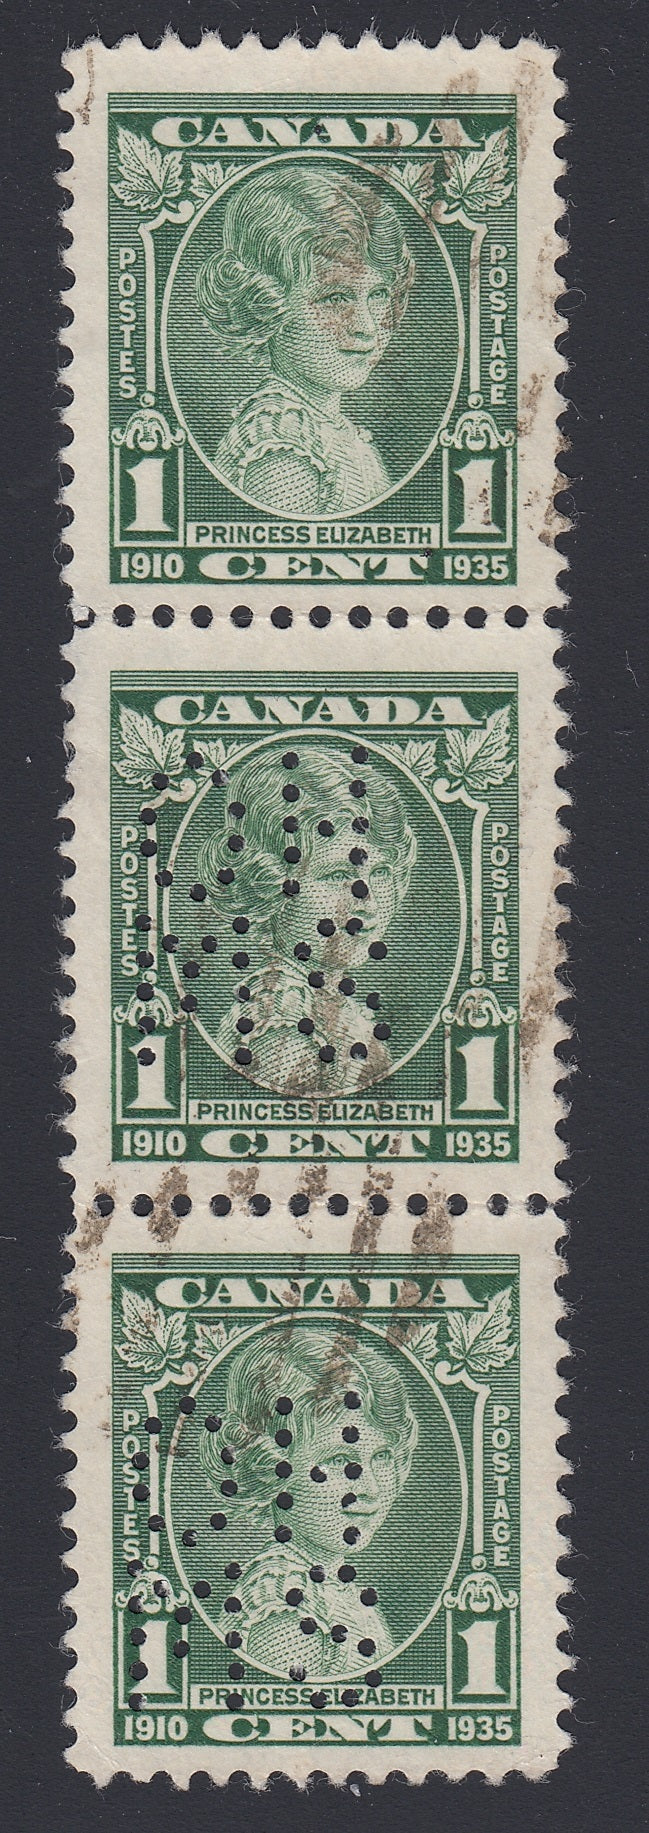 0241CA1804 - Canada OA211 &#39;A Z, A&#39; - Used Strip of 3